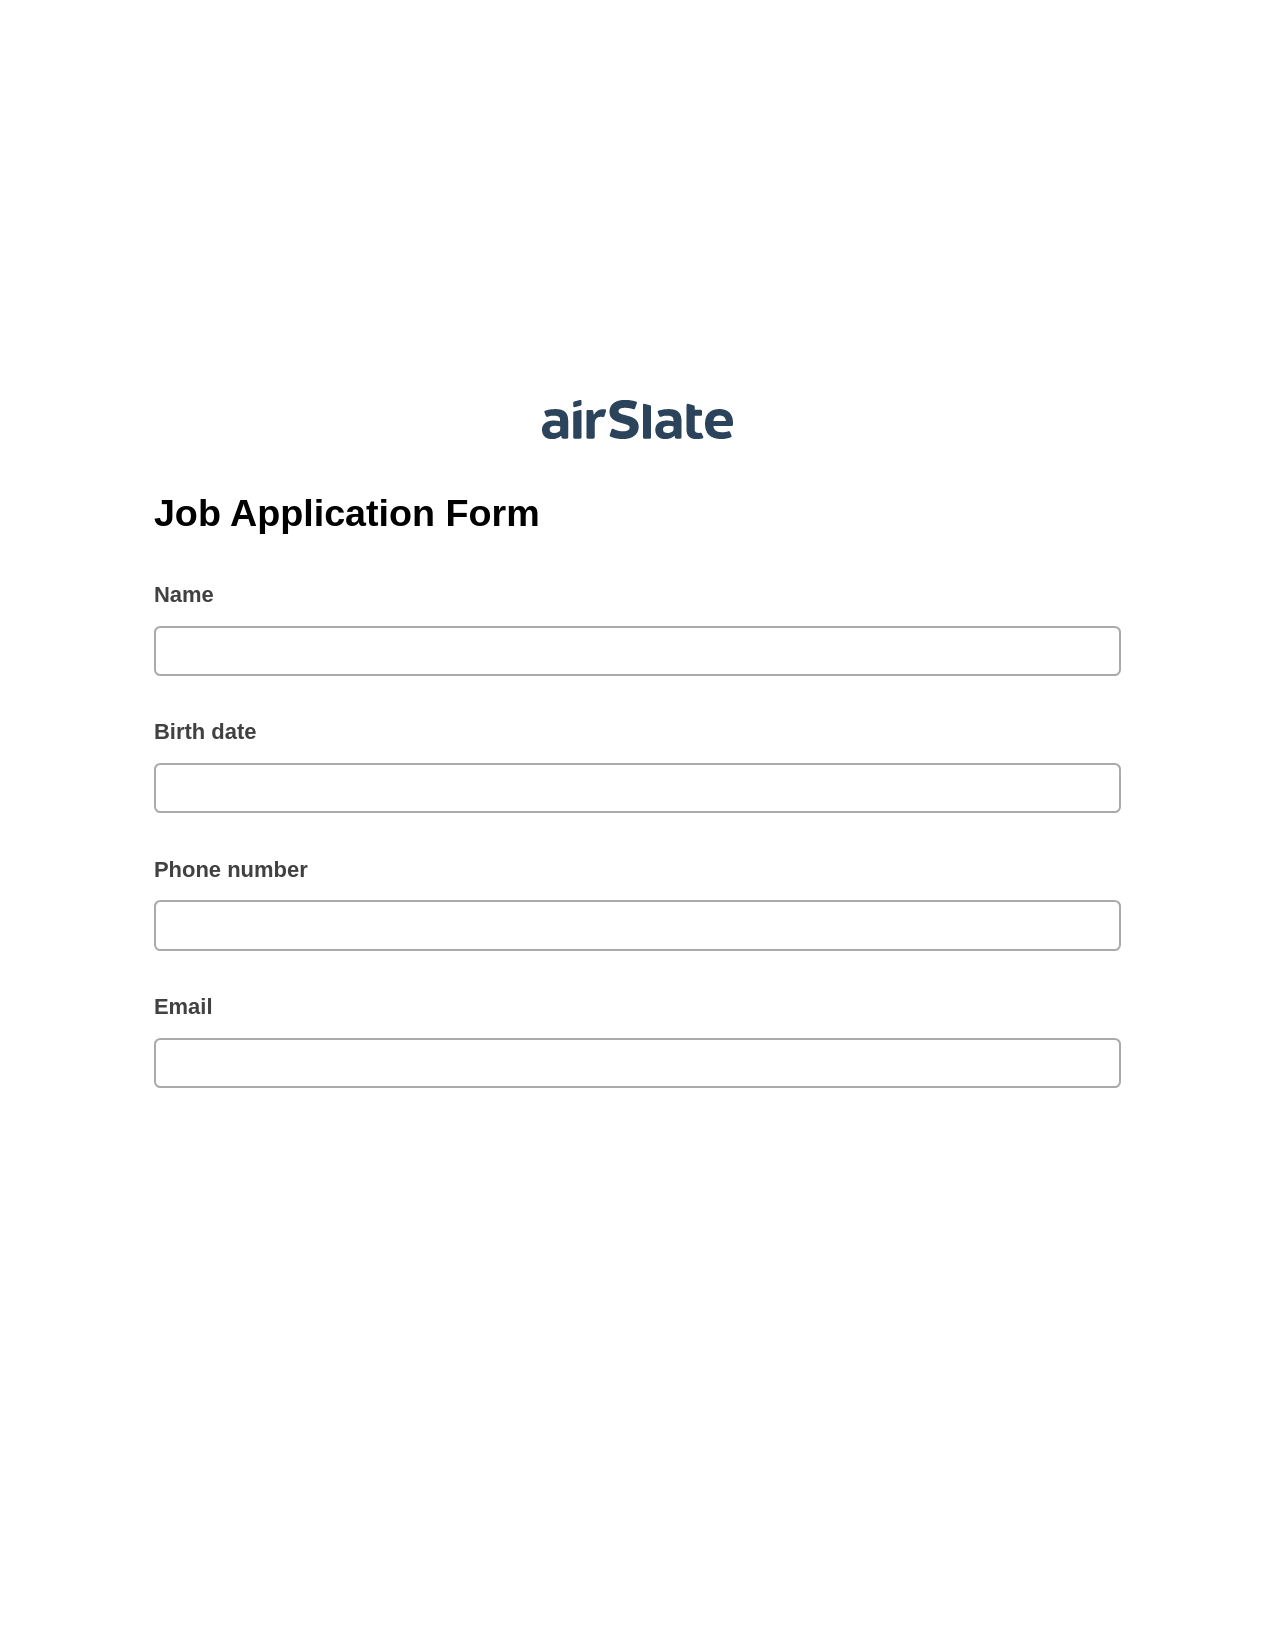 Multirole Job Application Form Pre-fill from Excel Spreadsheet Bot, Export to MS Dynamics 365 Bot, Export to Google Sheet Bot